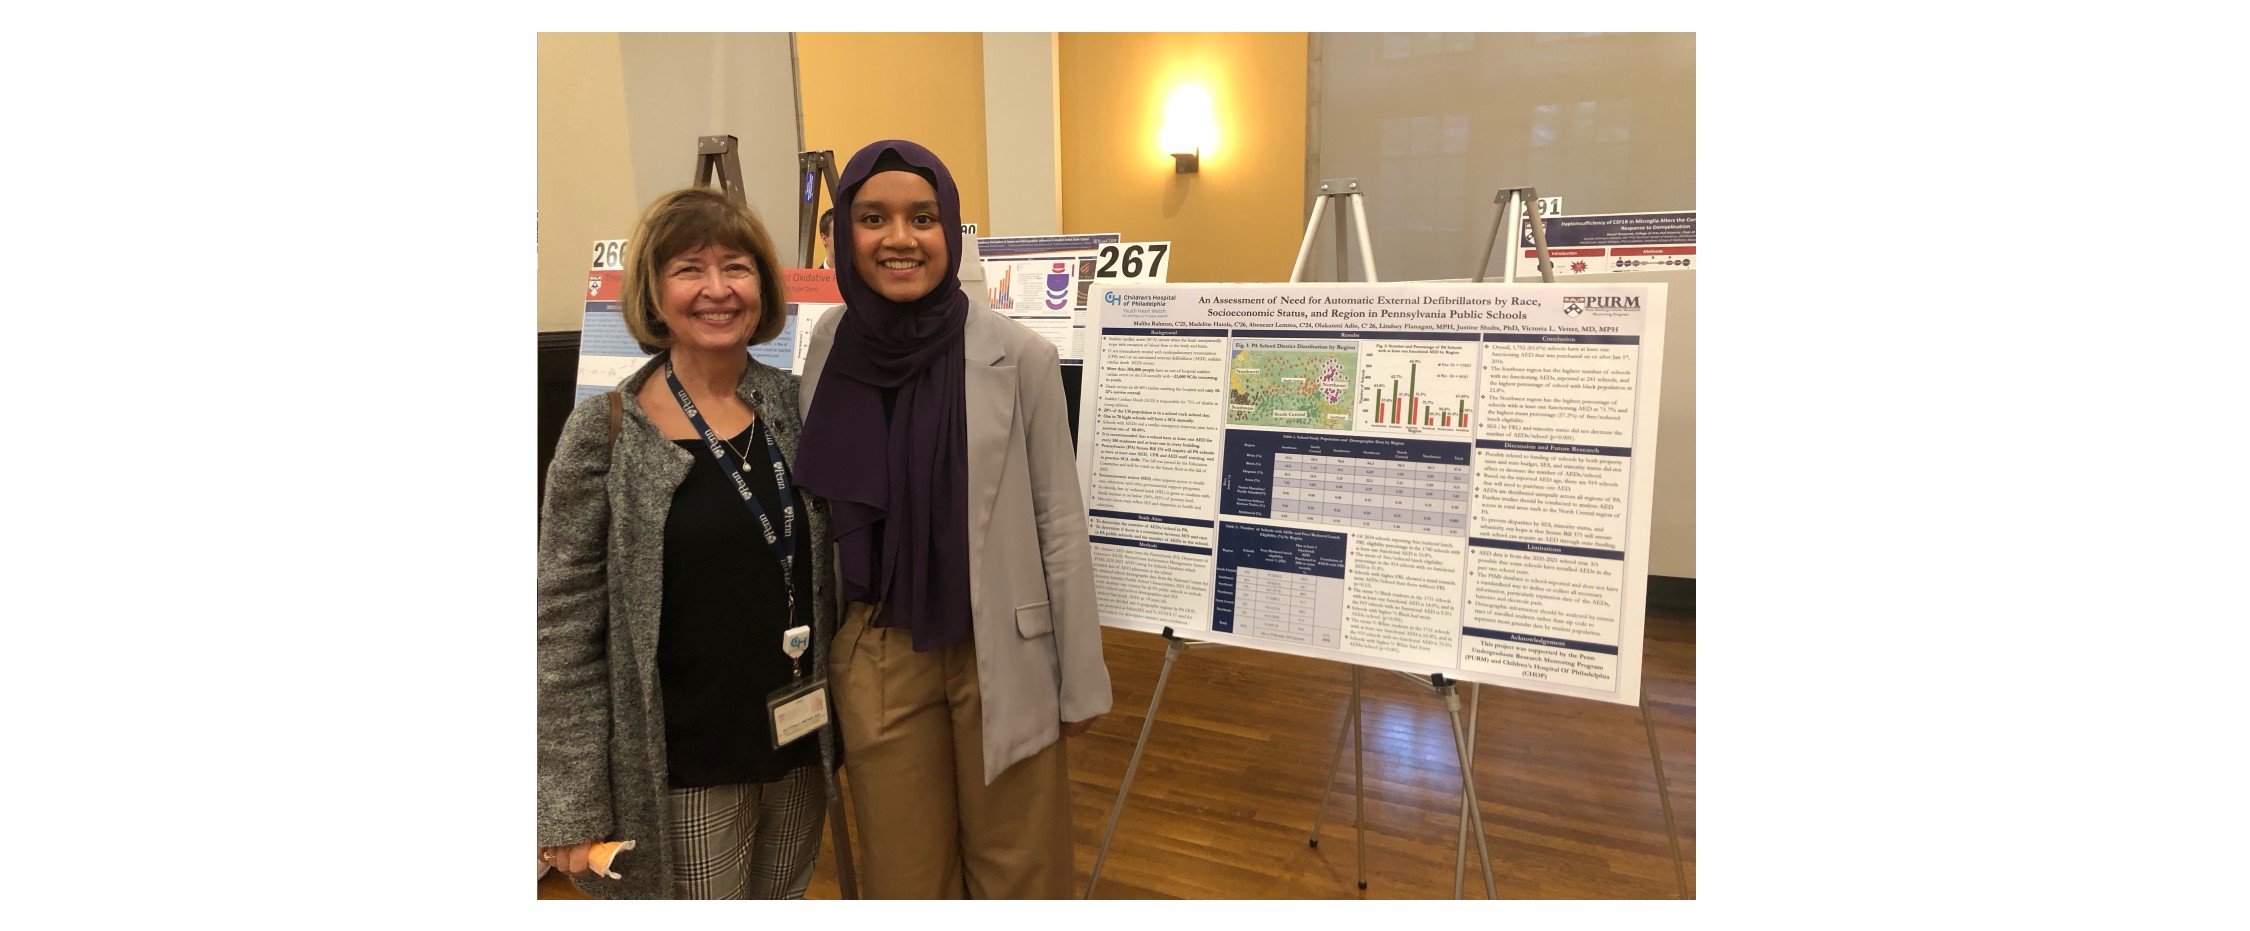 Maliha and Dr. Vetter at the Research Expo